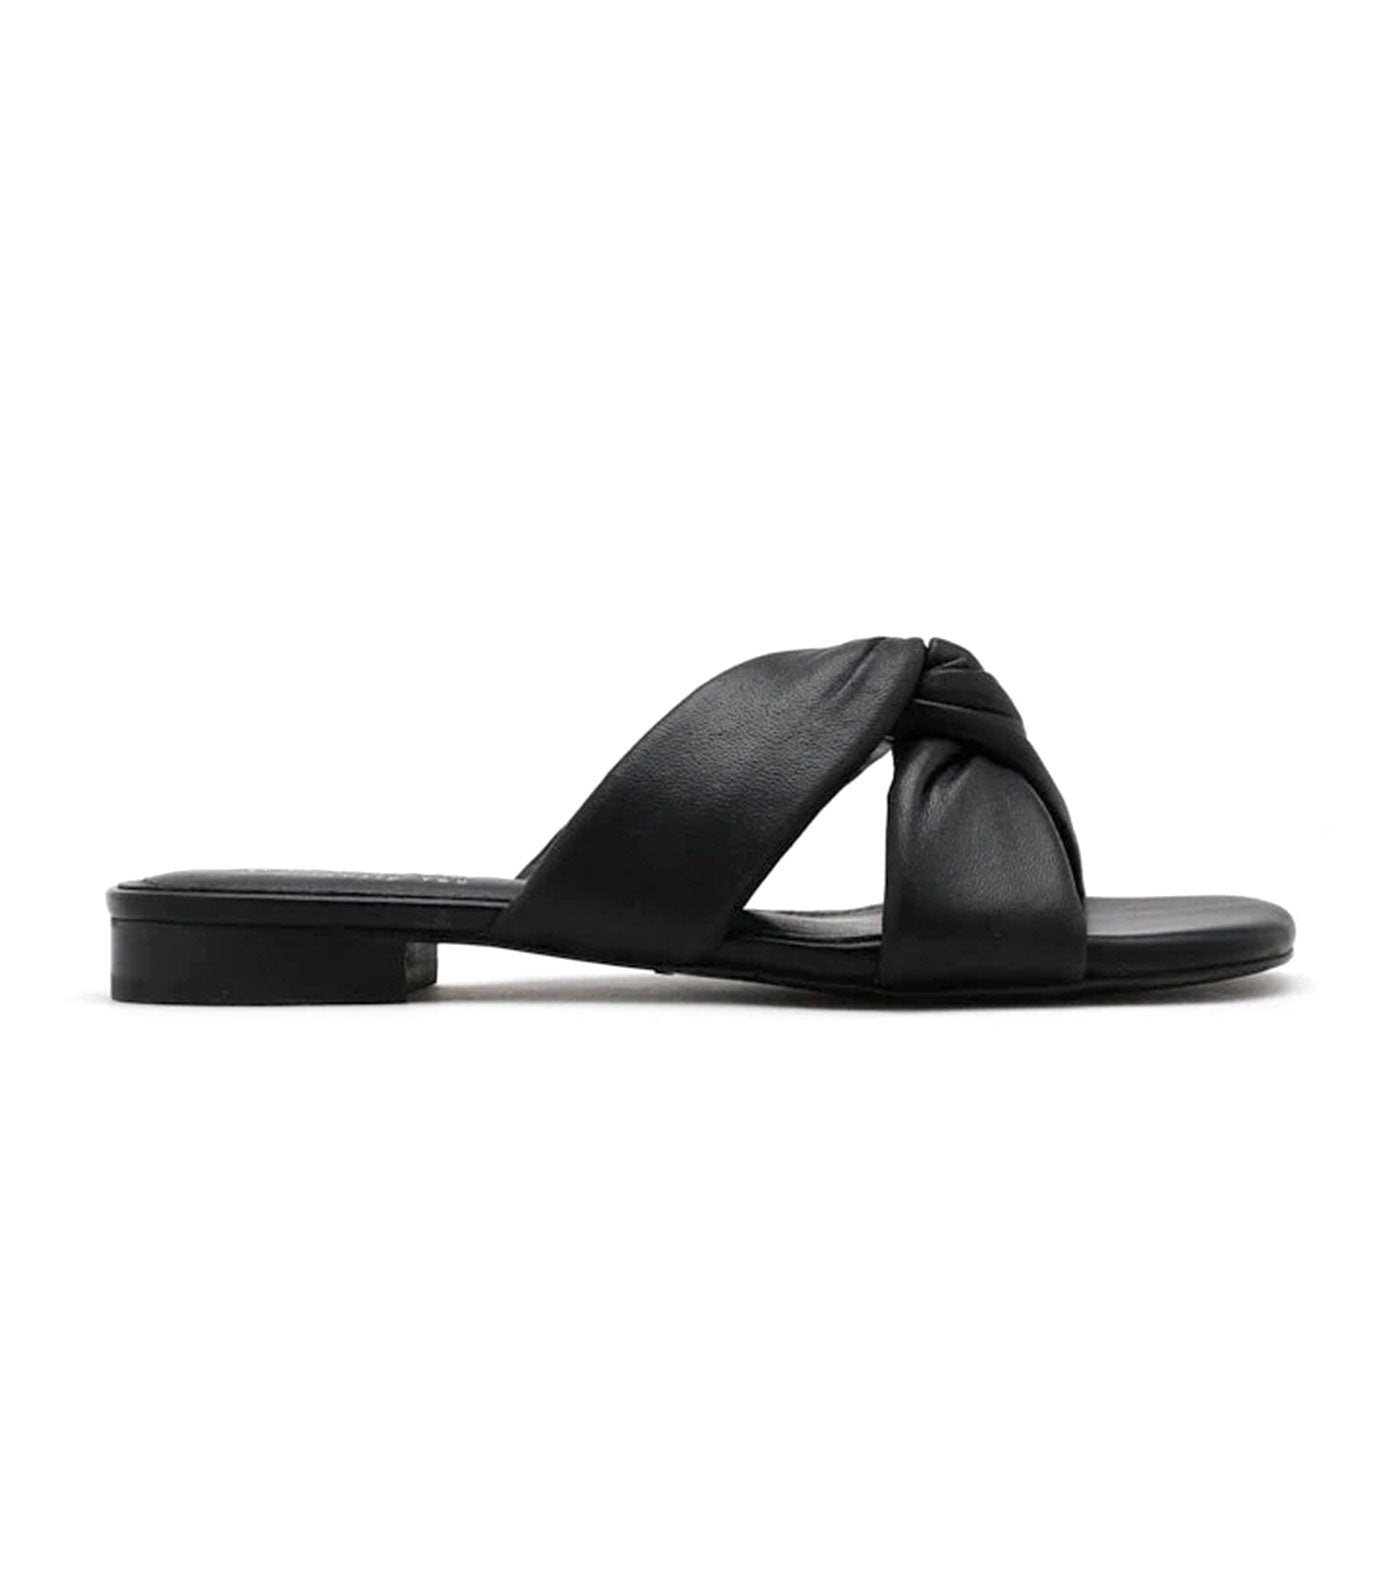 Lily Knotted Sandals Black